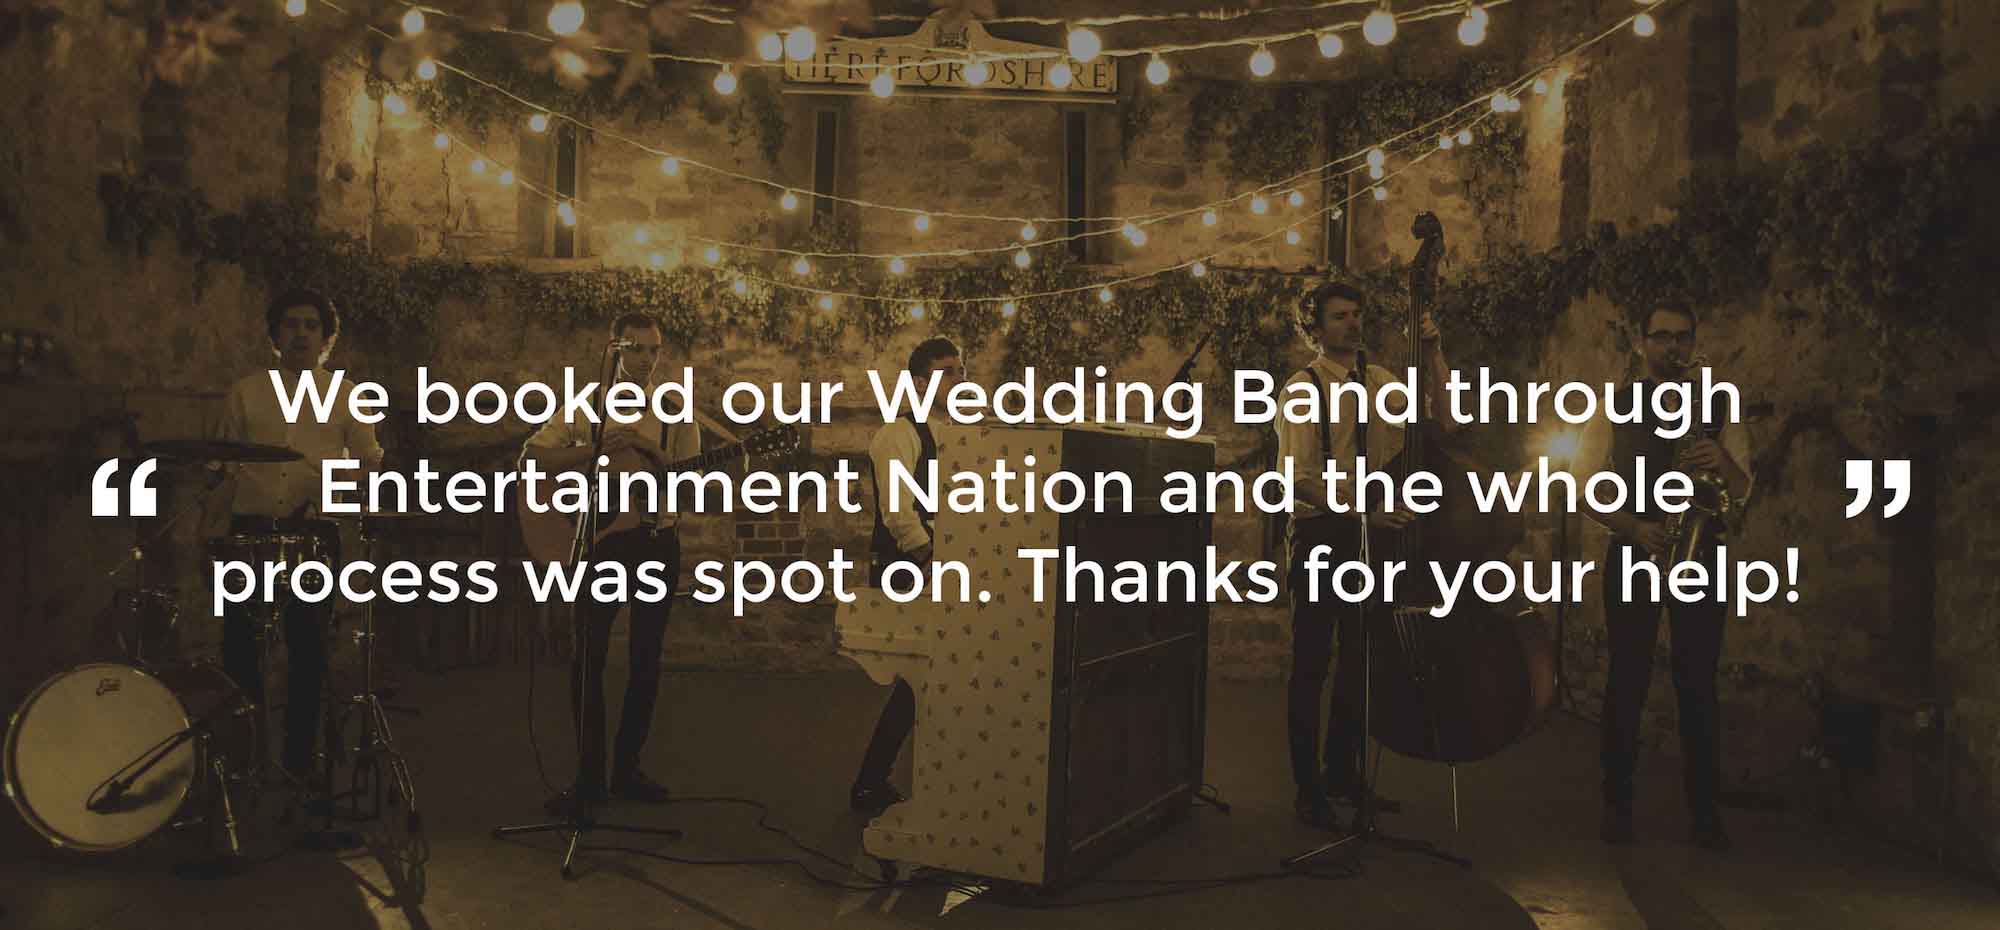 Client Review of a Wedding Band Flintshire